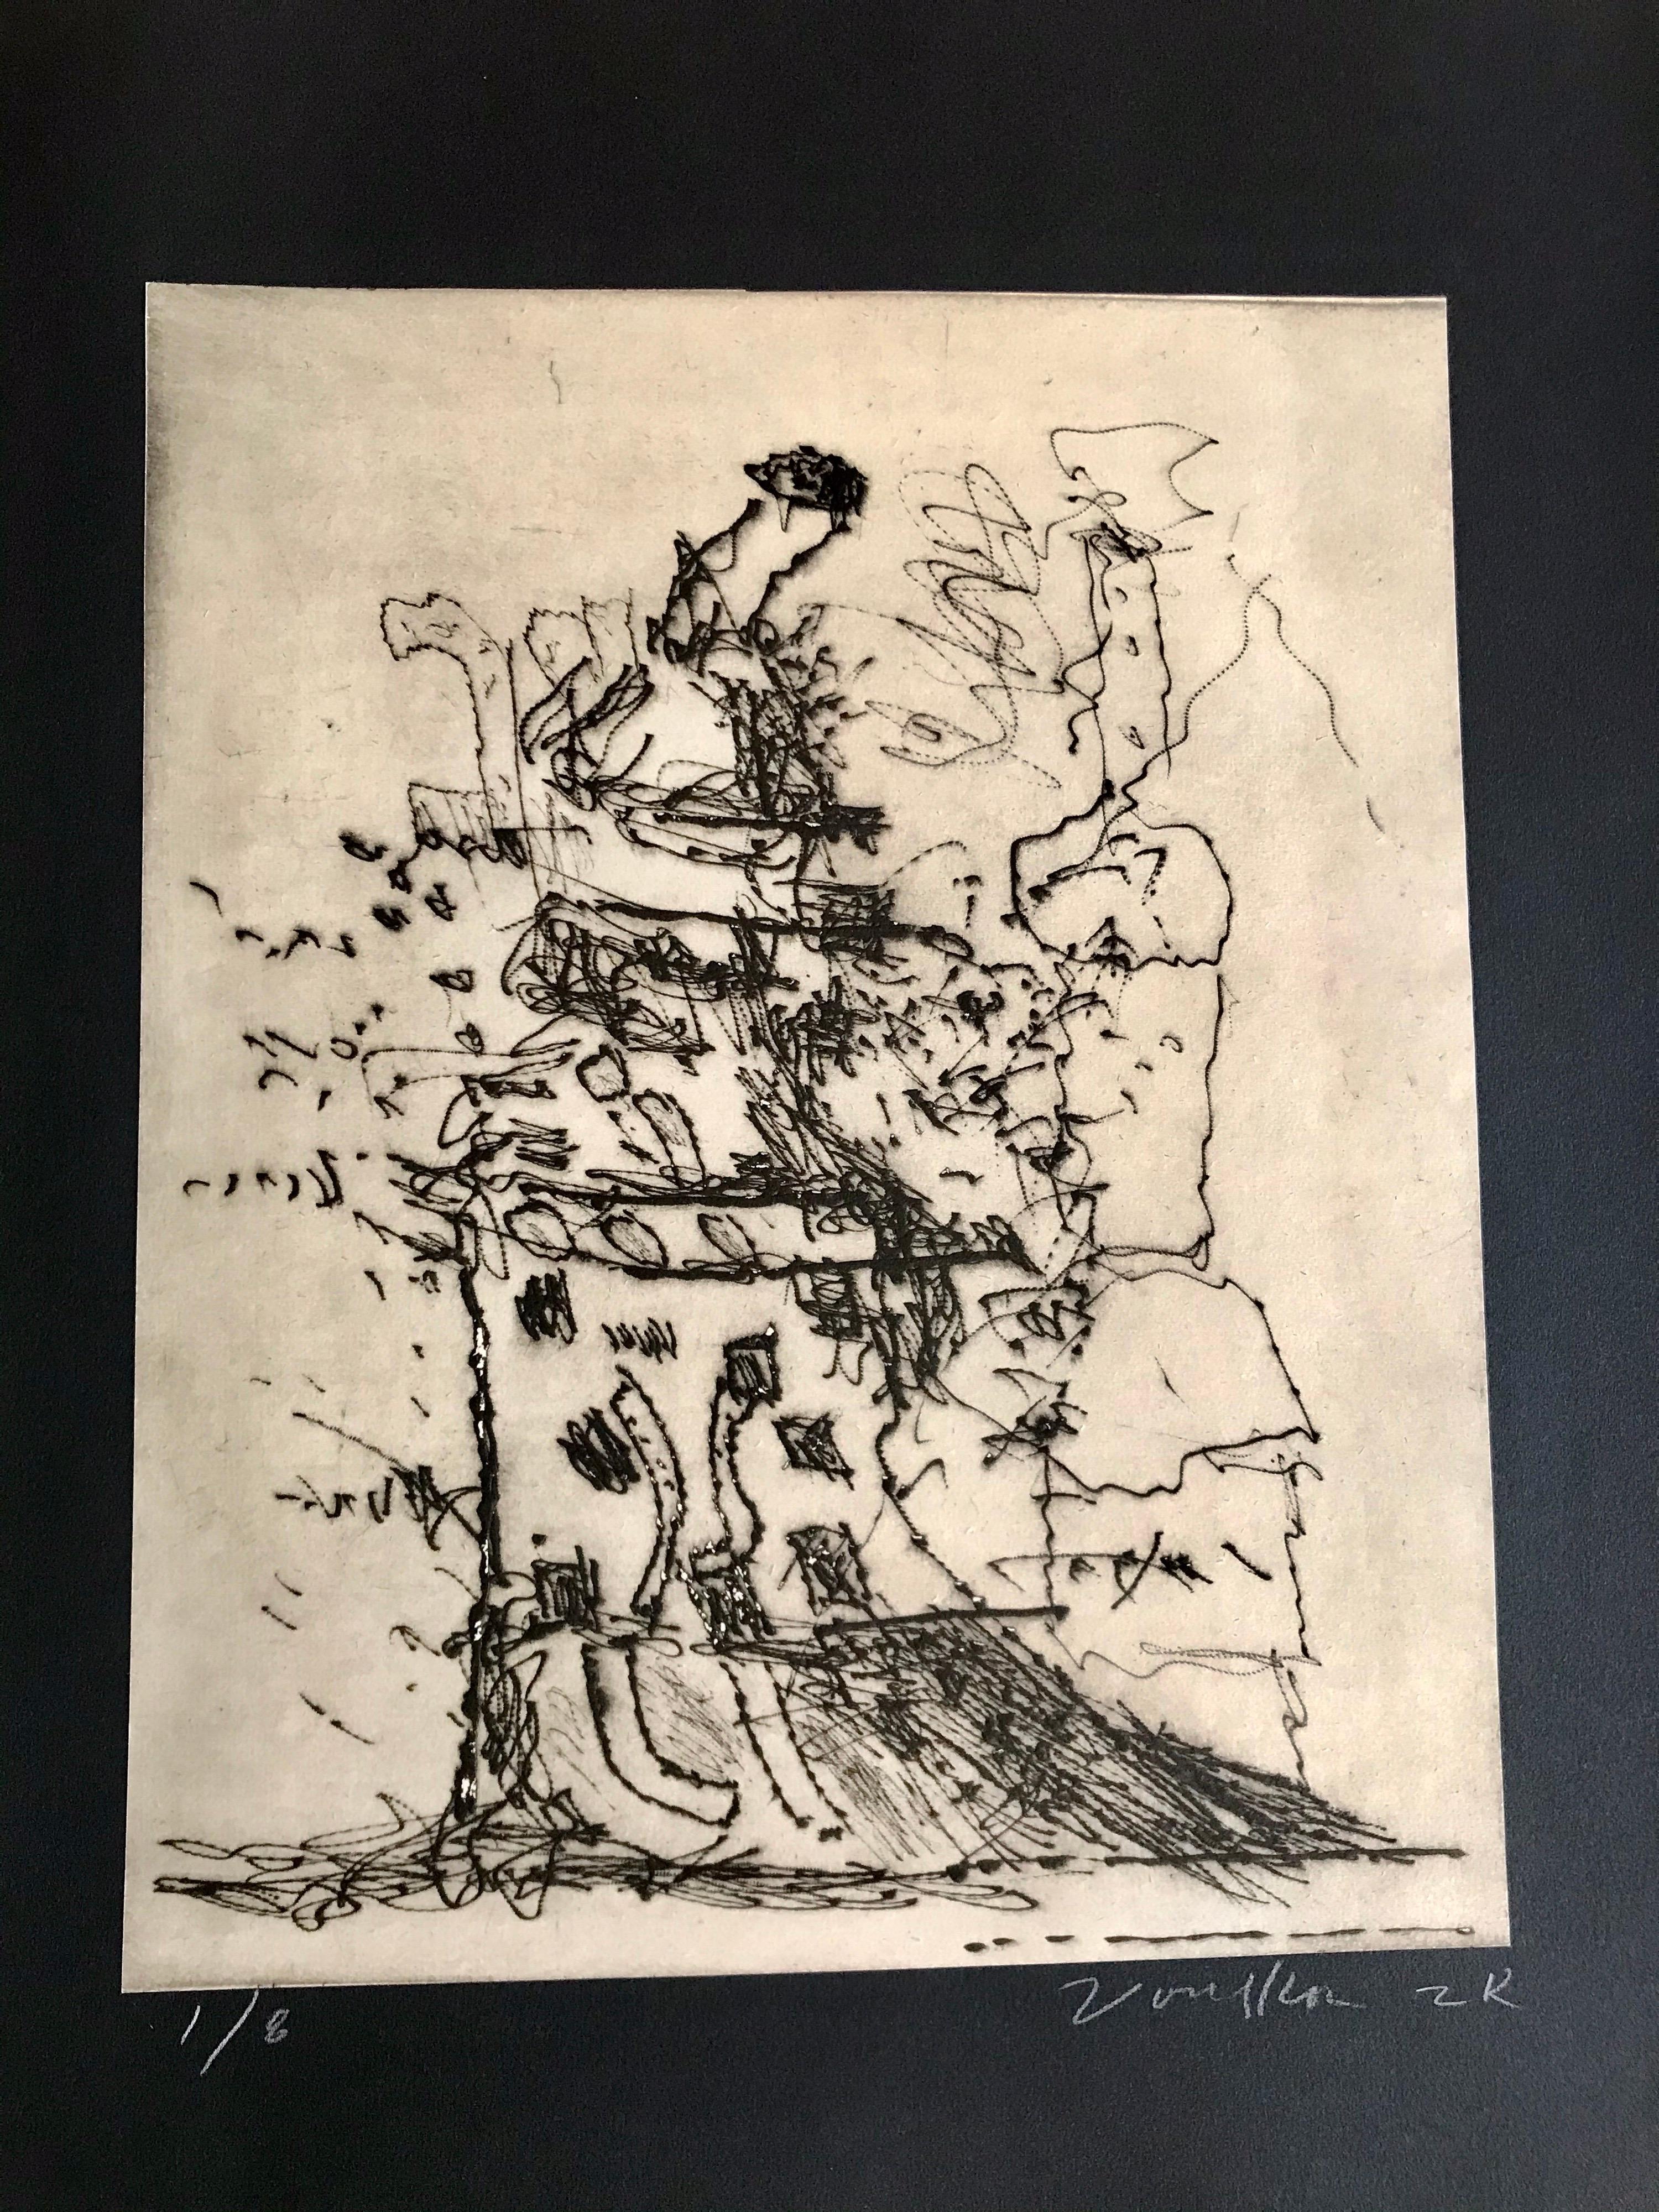 1924-2002 
A rare and late piece of art on paper by one of the great abstract ceramic artist of California.
A nice print image of a stacked sculpture idea in textured sgraffito.
The print is professionally attached to the black wove paper which is